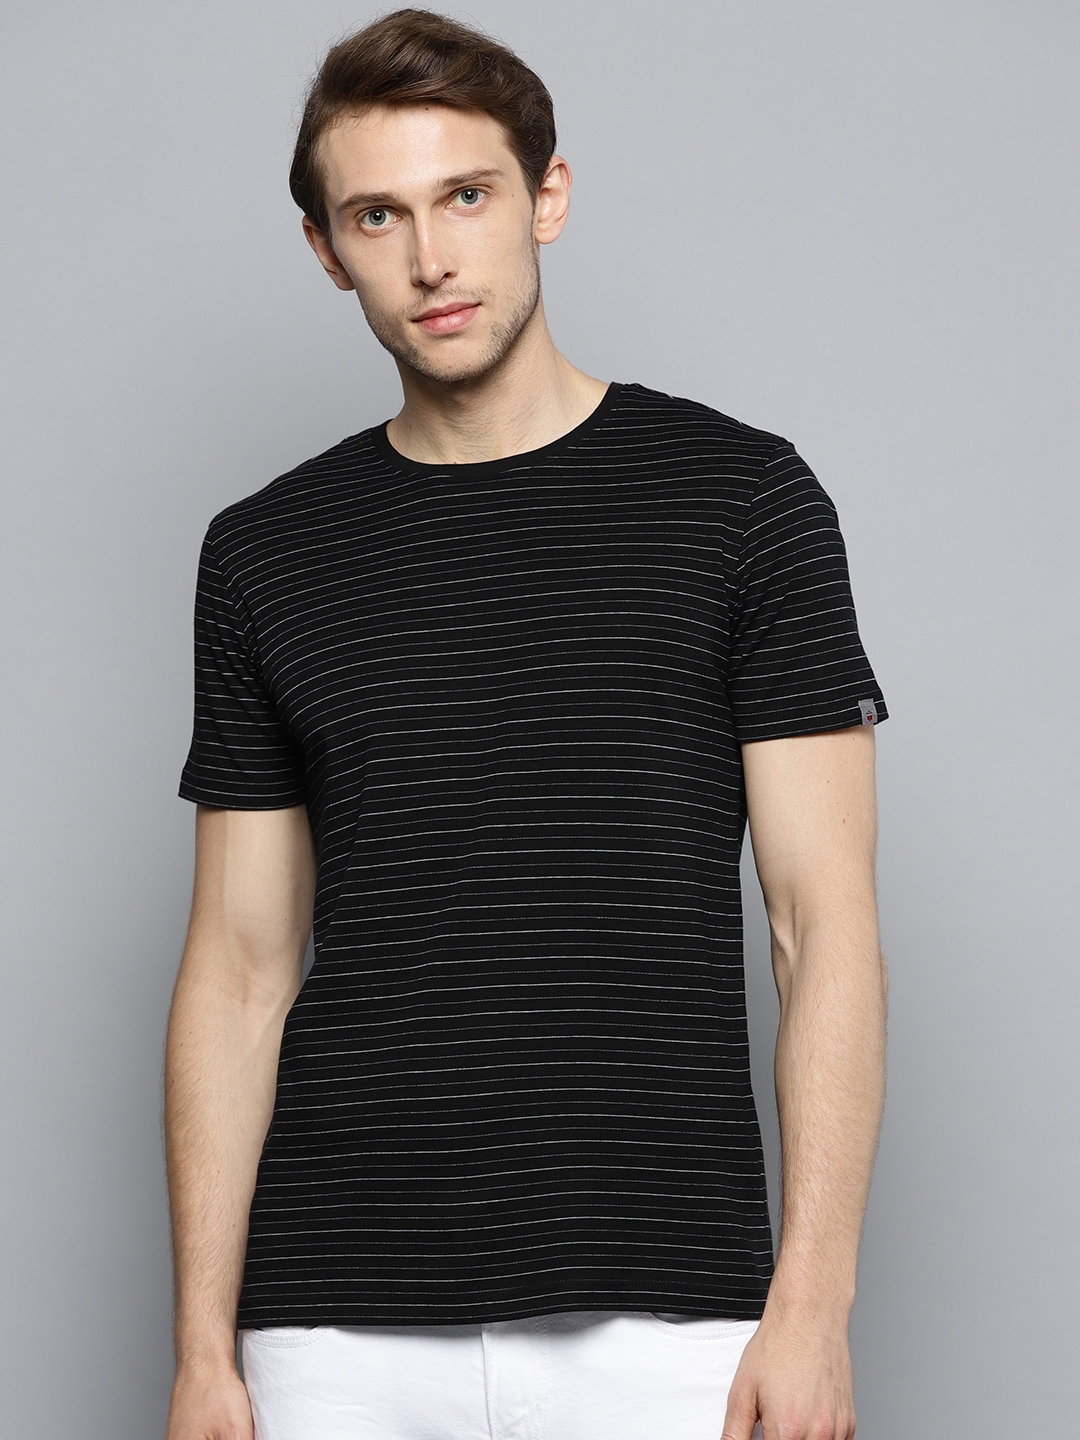 Buy Louis Philippe Jeans Men Black & Grey Striped Round Neck T Shirt - Tshirts for Men 8214339 ...